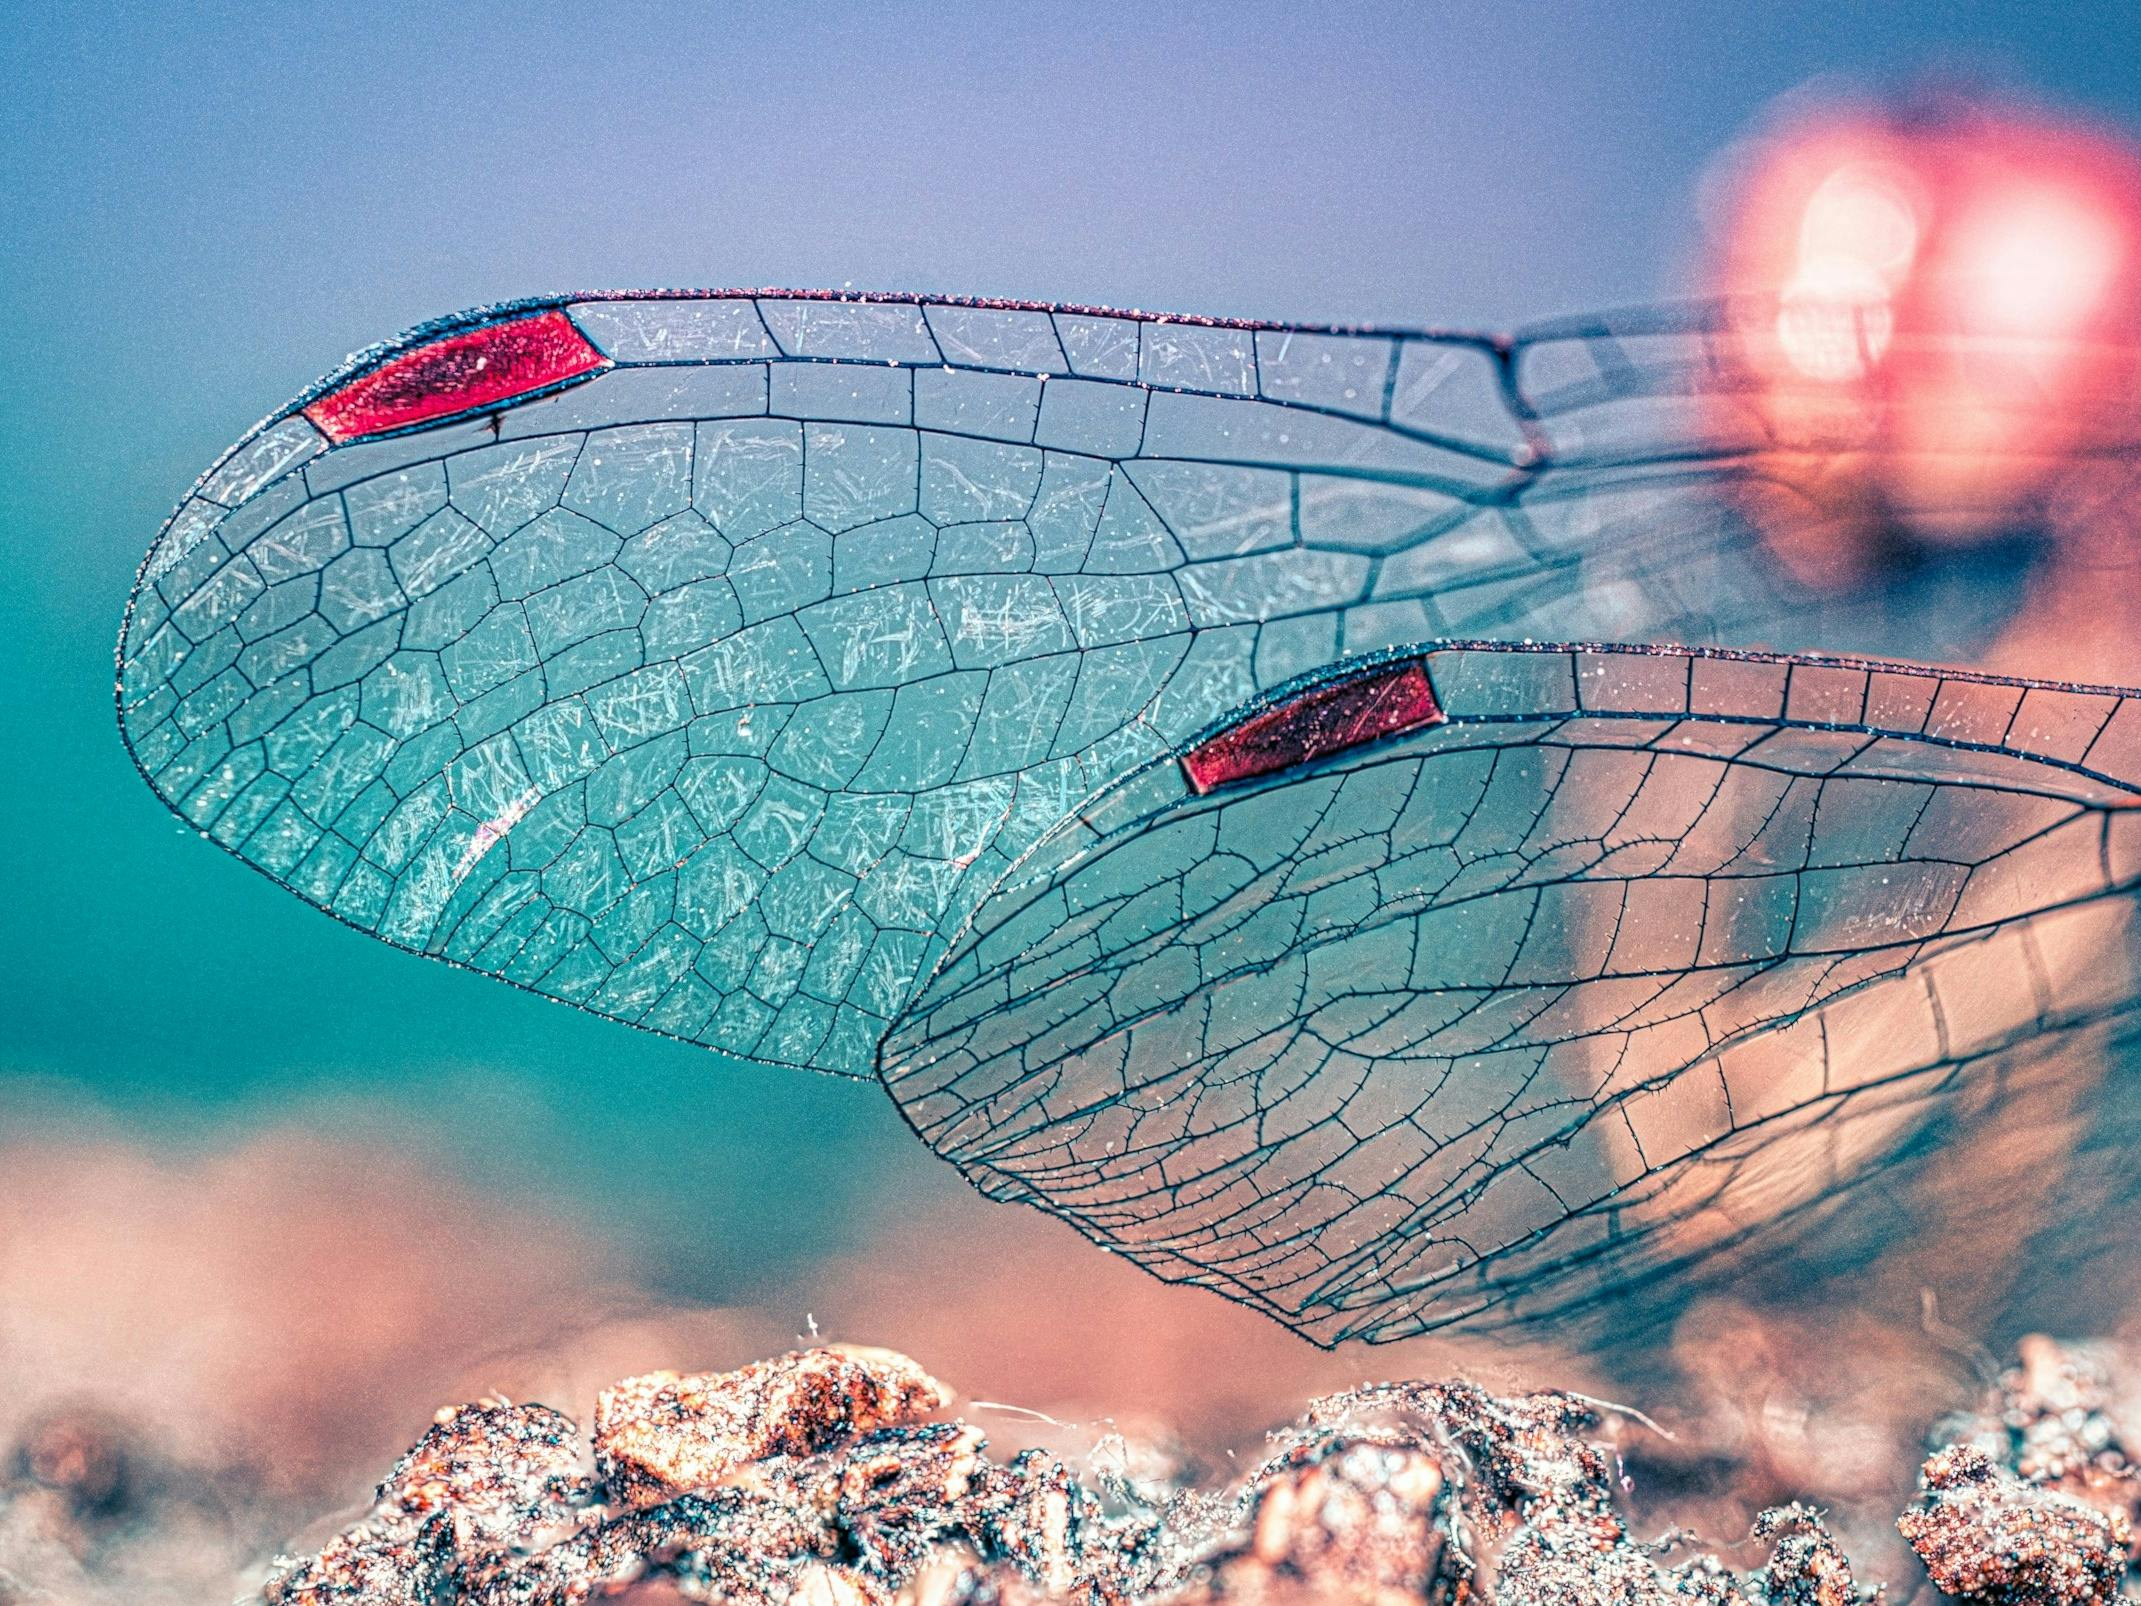 An example of macro photography, close up photography of an insect's wings showing all the detail